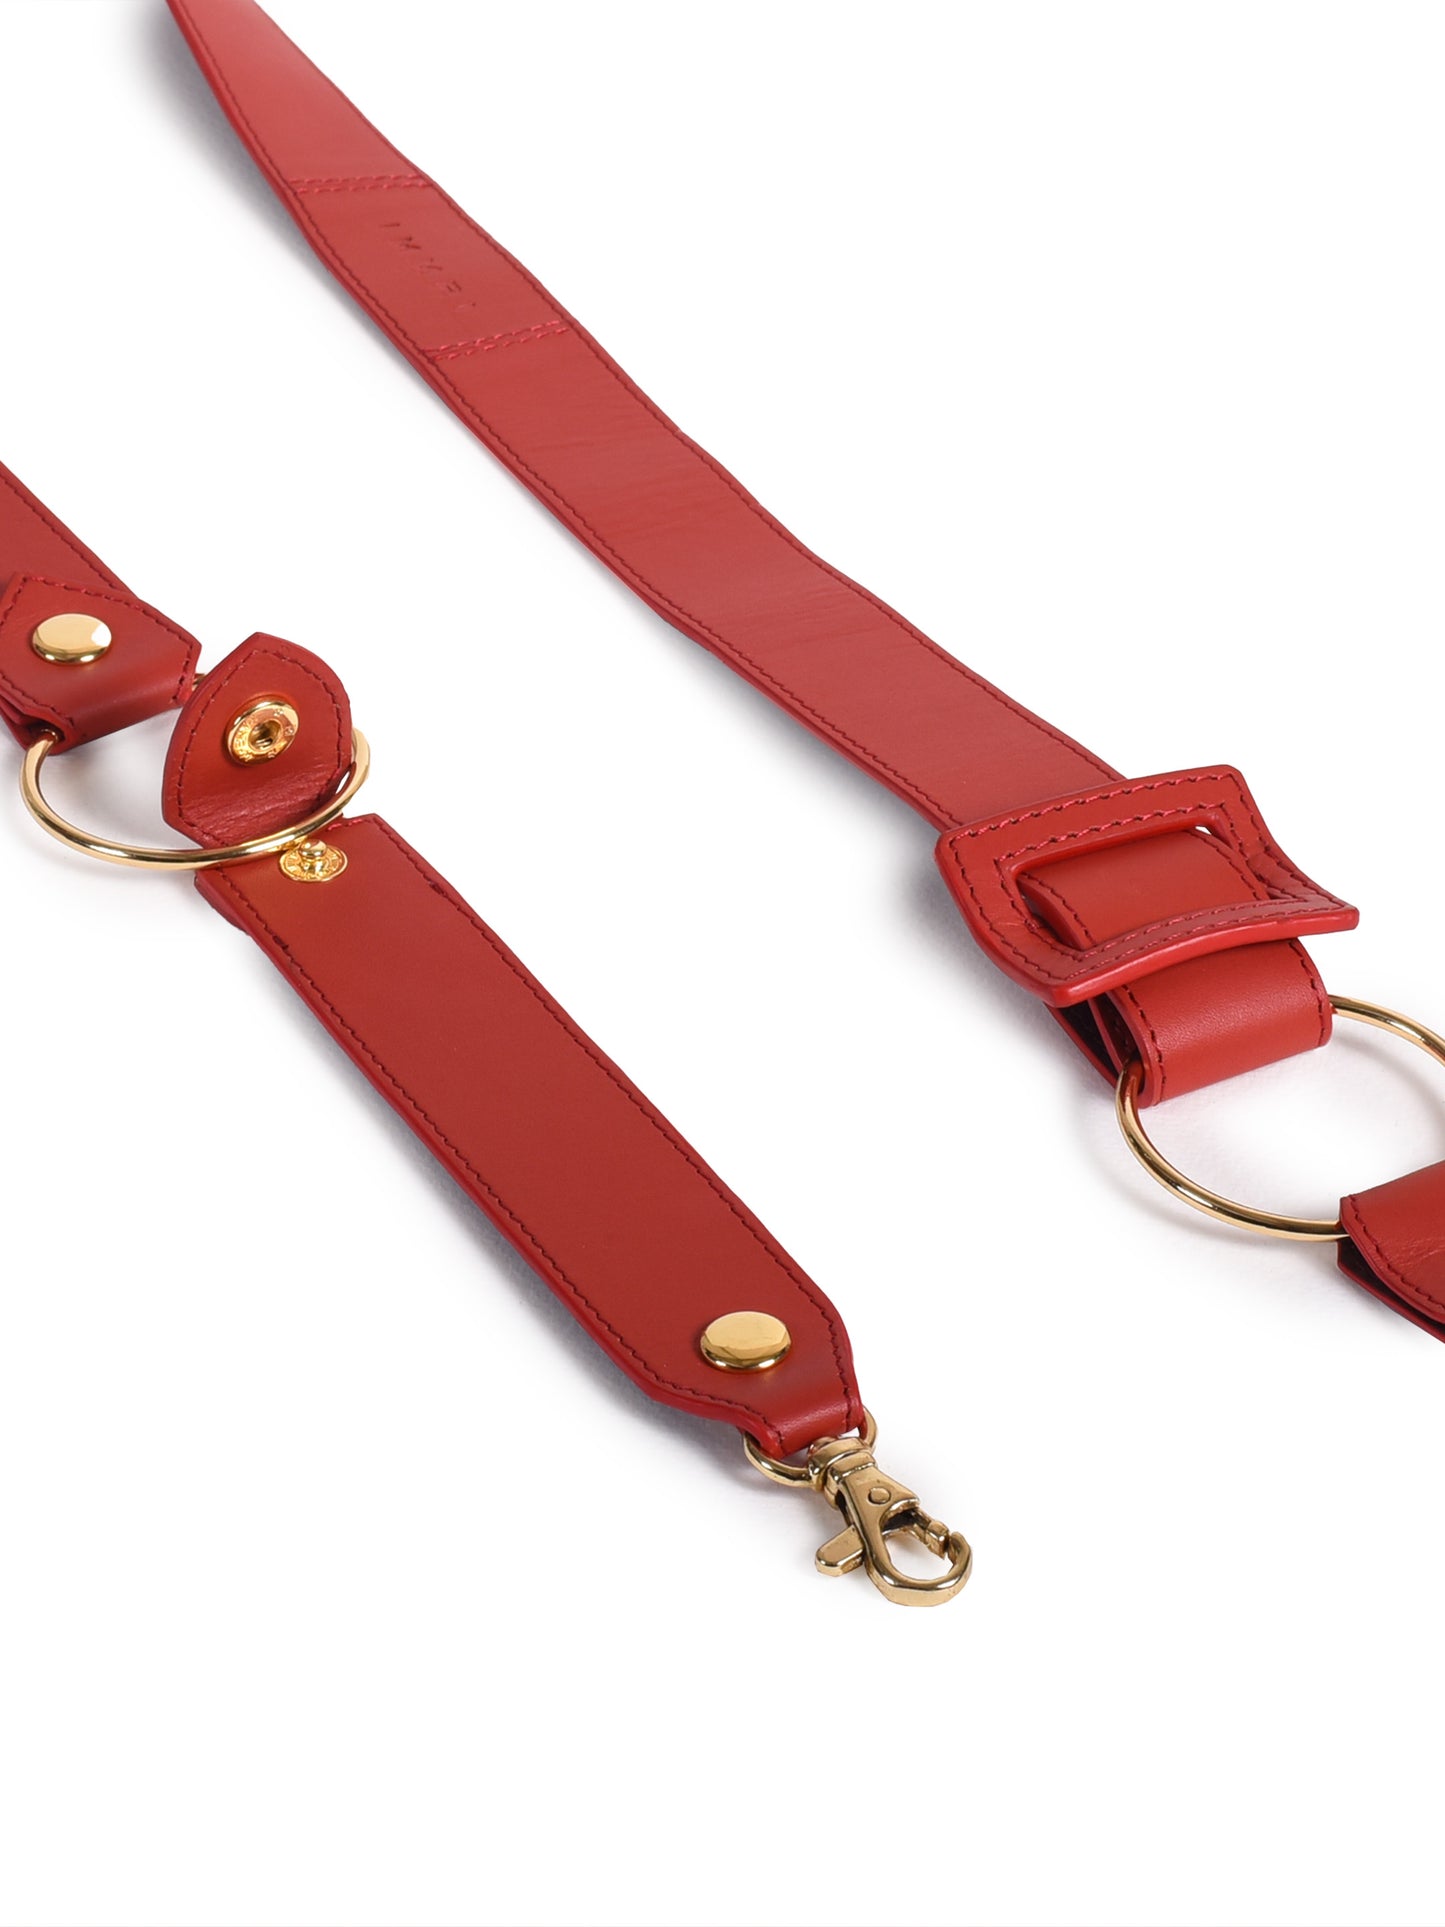 Strap Belt and Red Potli Bag with Evil Eye Charm